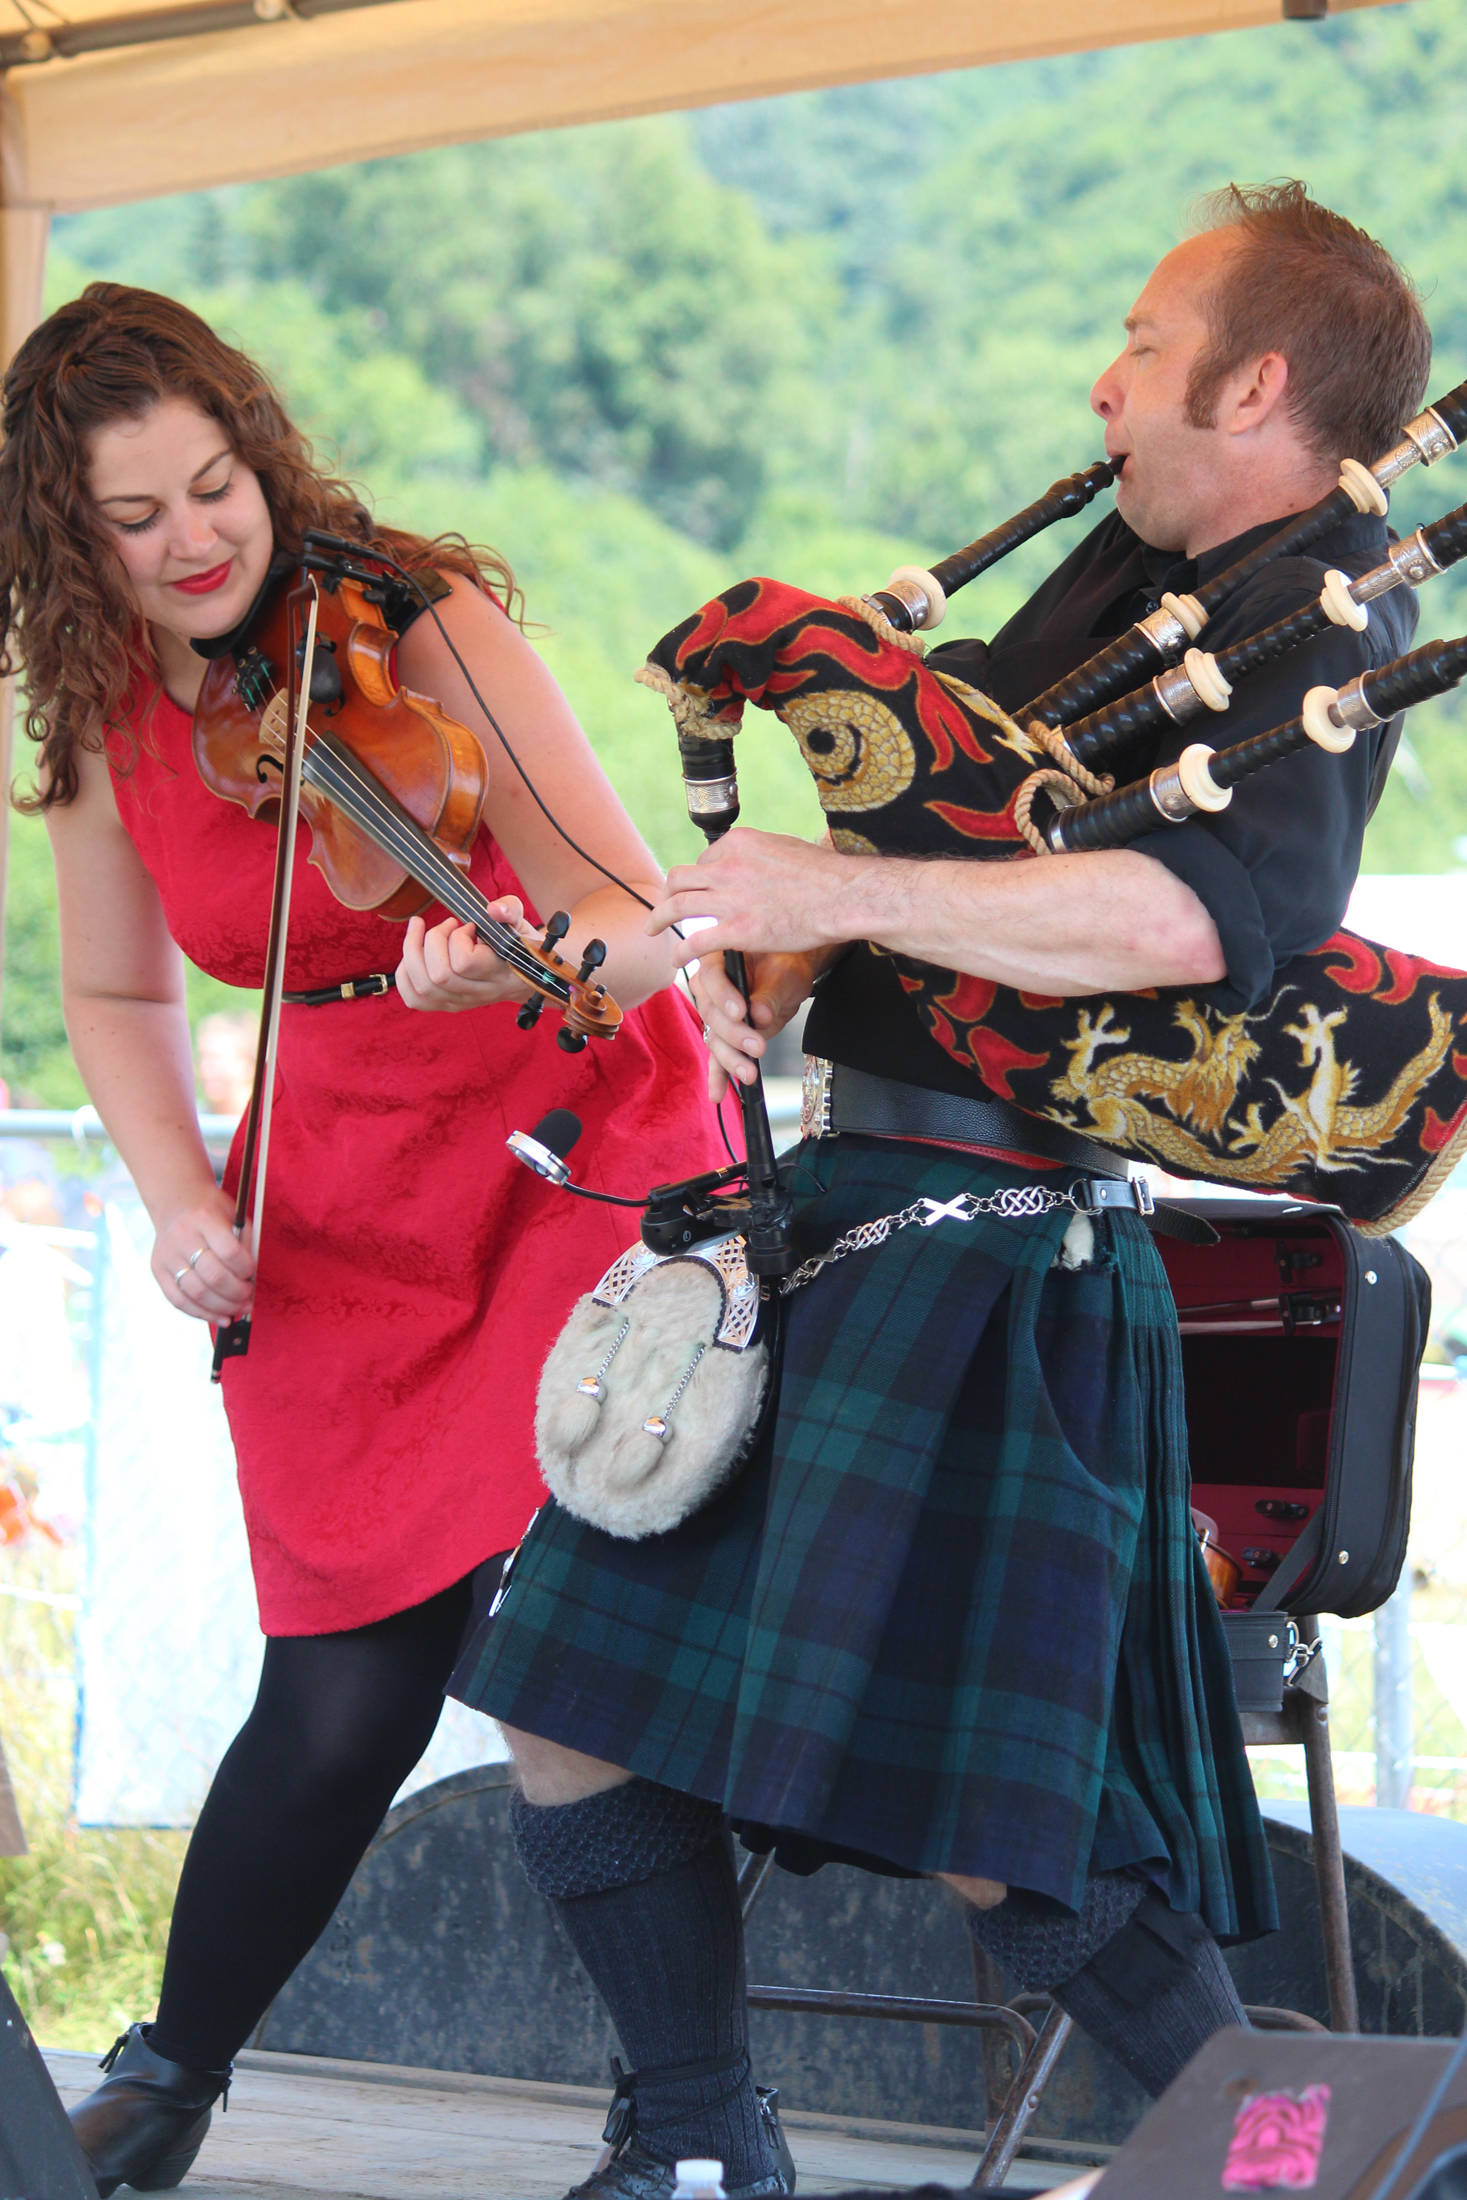 Rebecca Lomnicky and David Brewer of the Scottish music band The Fire perform along with bandmate Adam Hendey for the annual Kachemak Bay Highland Games on Saturday, July 6, 2019 at Karen Hornaday Park in Homer, Alaska. (Photo by Megan Pacer/Homer News)